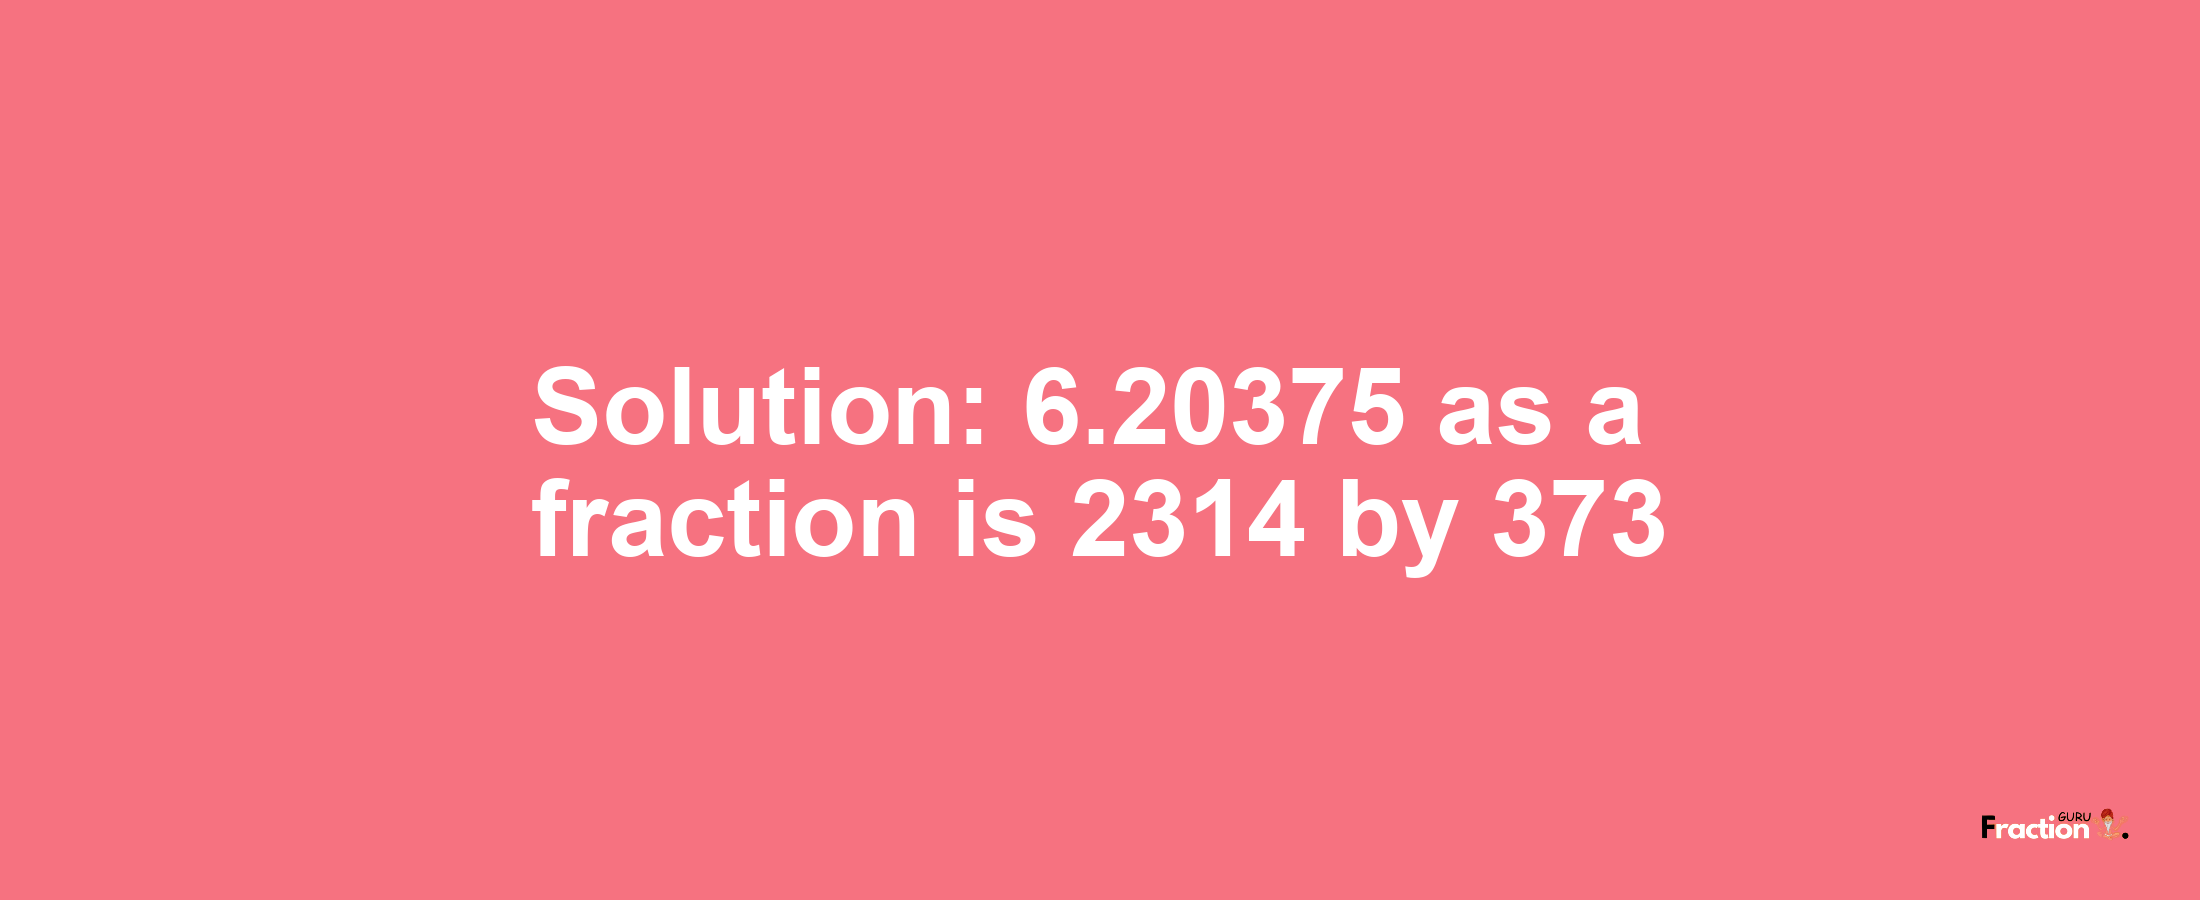 Solution:6.20375 as a fraction is 2314/373